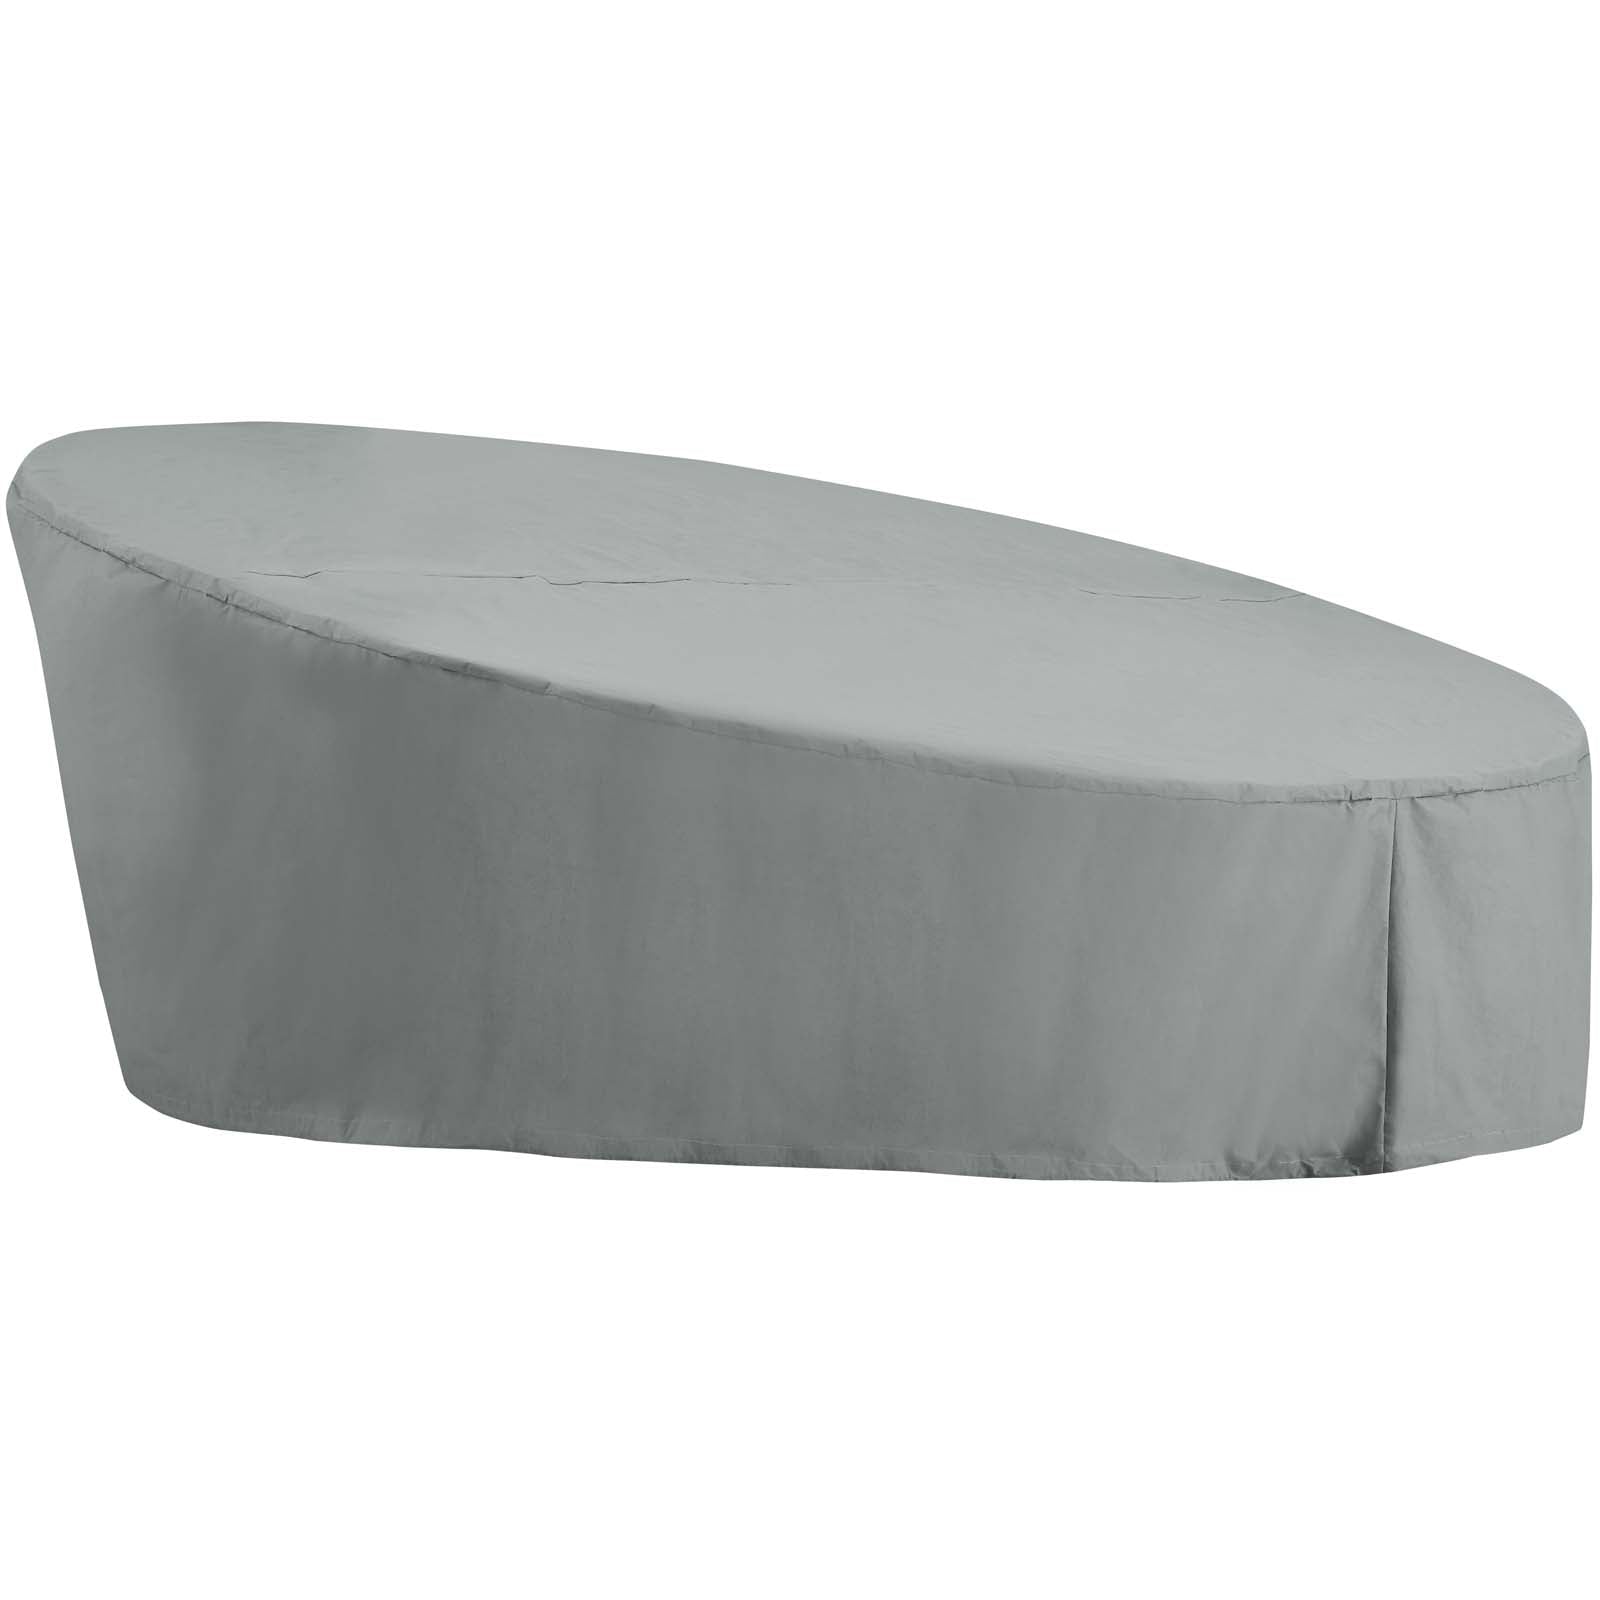 Immerse Convene / Sojourn / Summon Daybed Outdoor Patio Furniture Cover